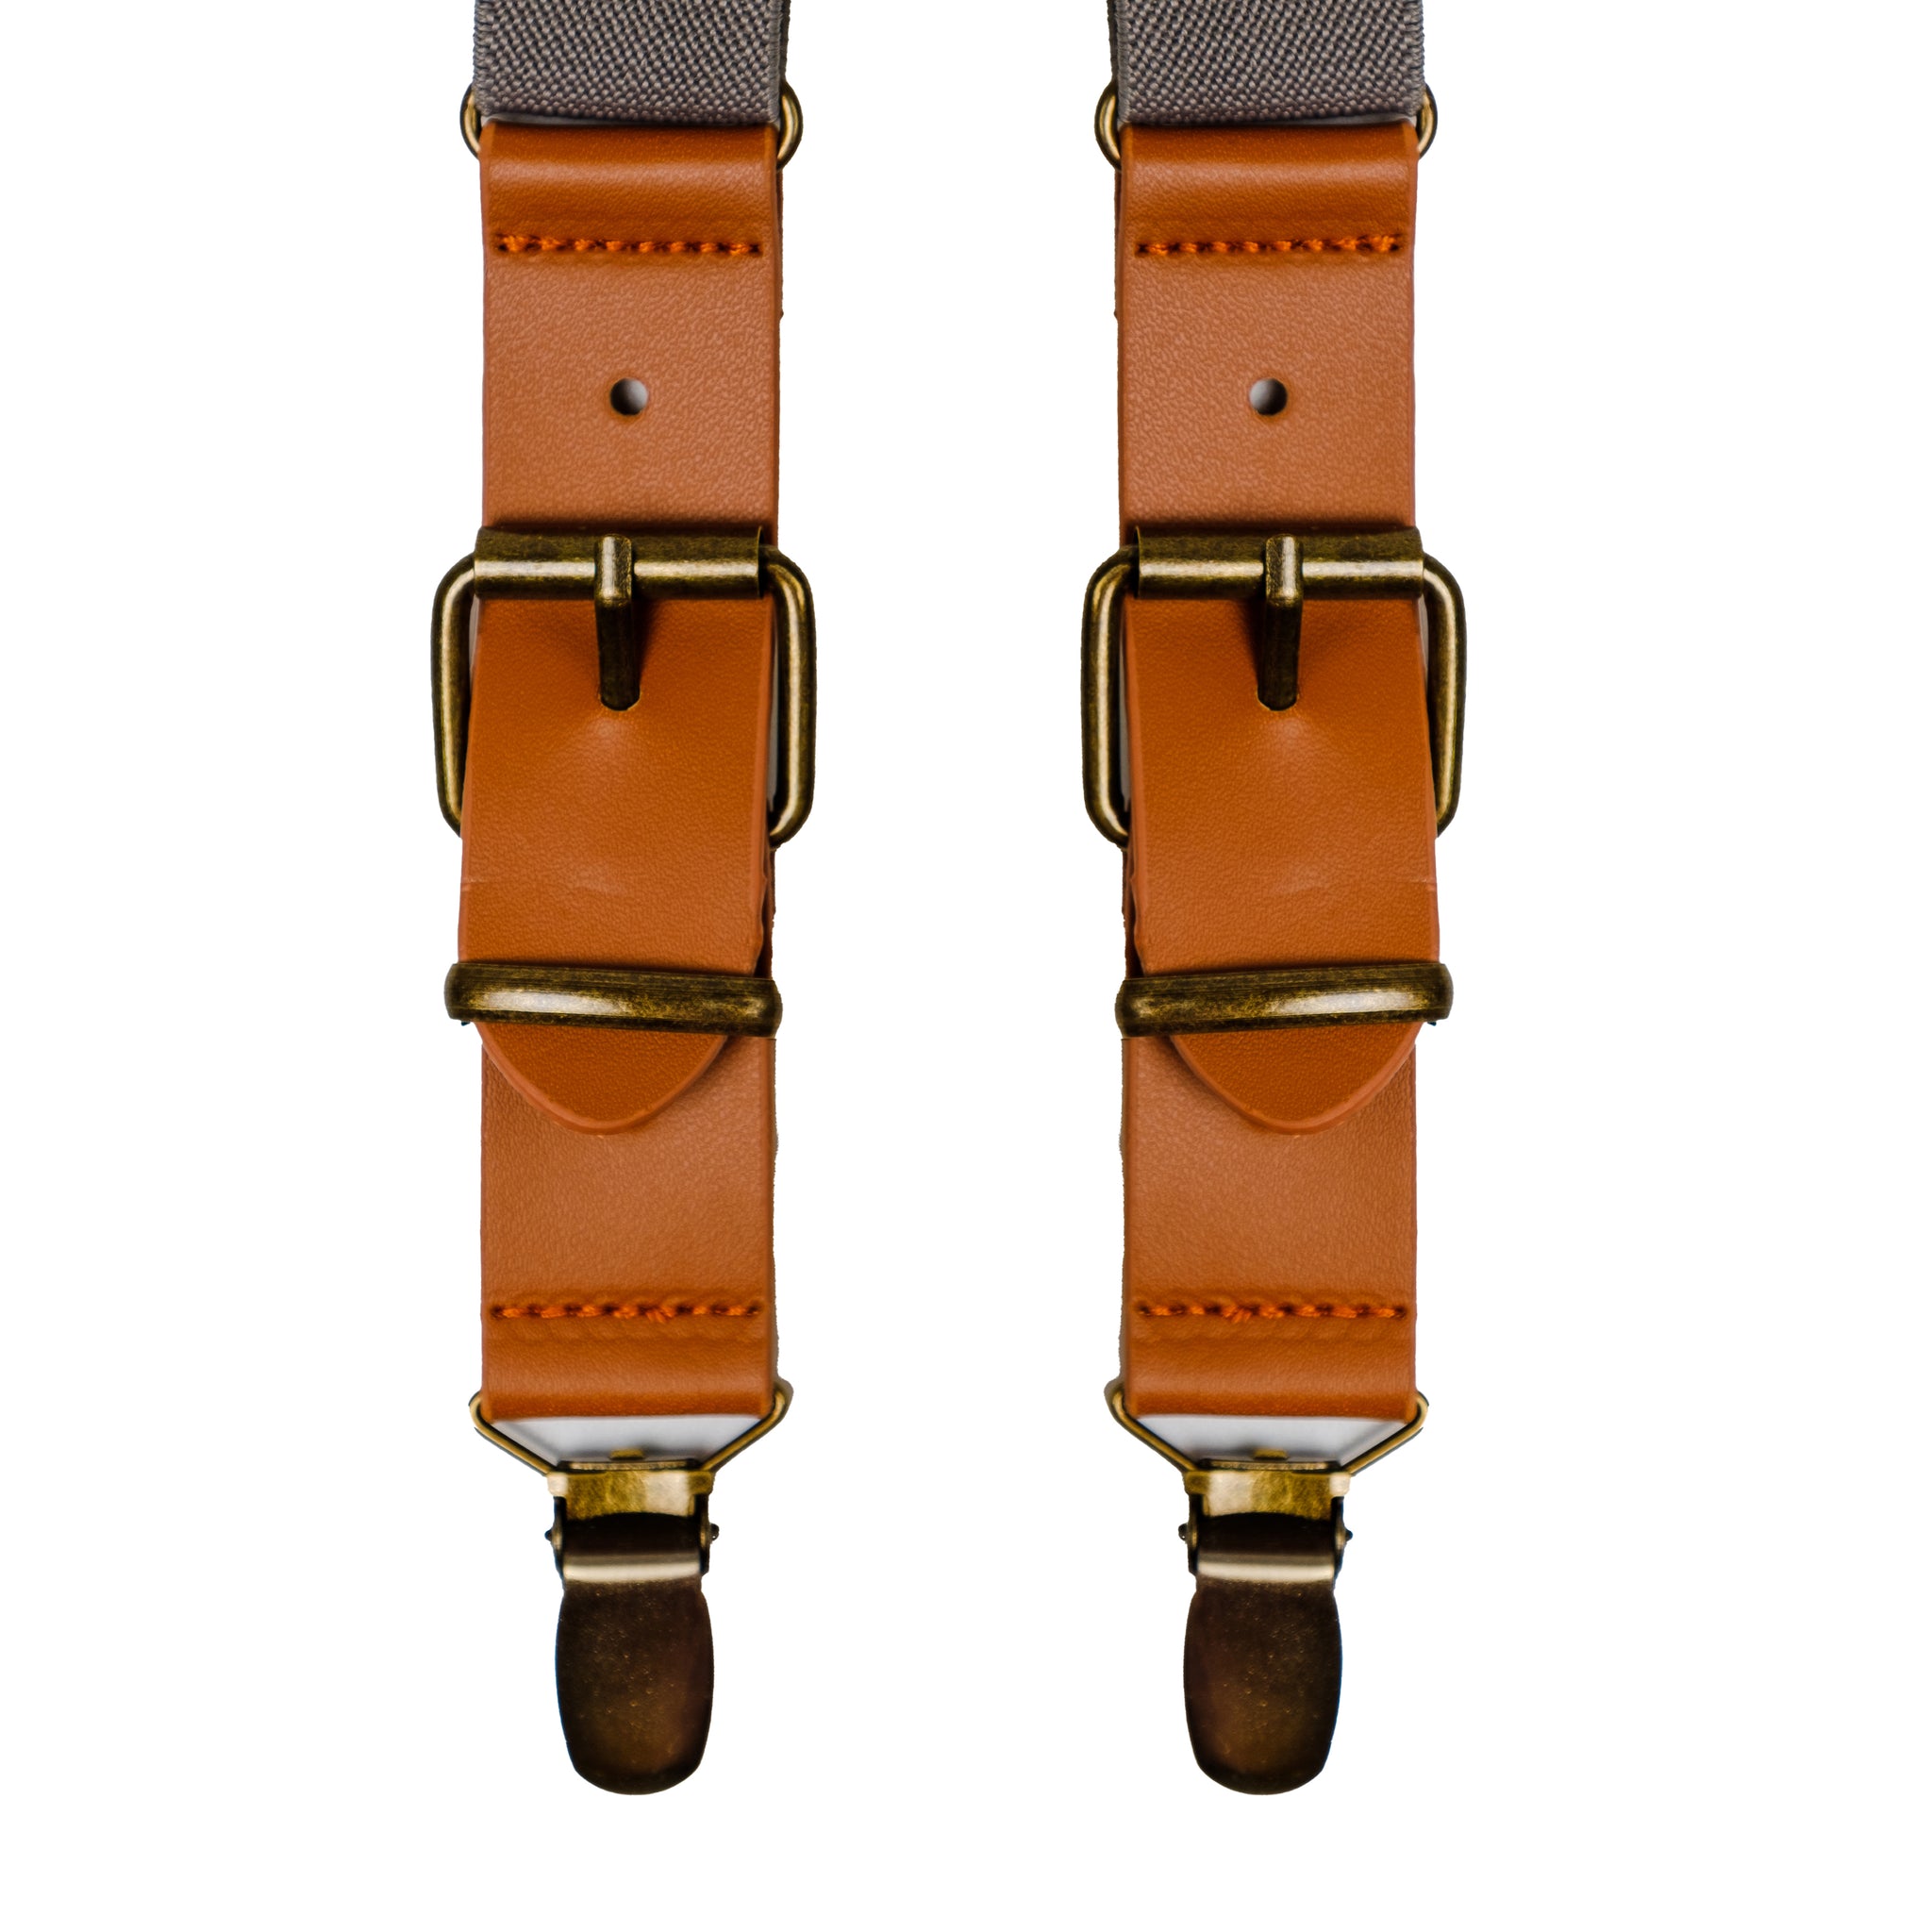 Chokore Y-shaped Suspenders with Leather detailing and adjustable Elastic Strap (Light Gray)